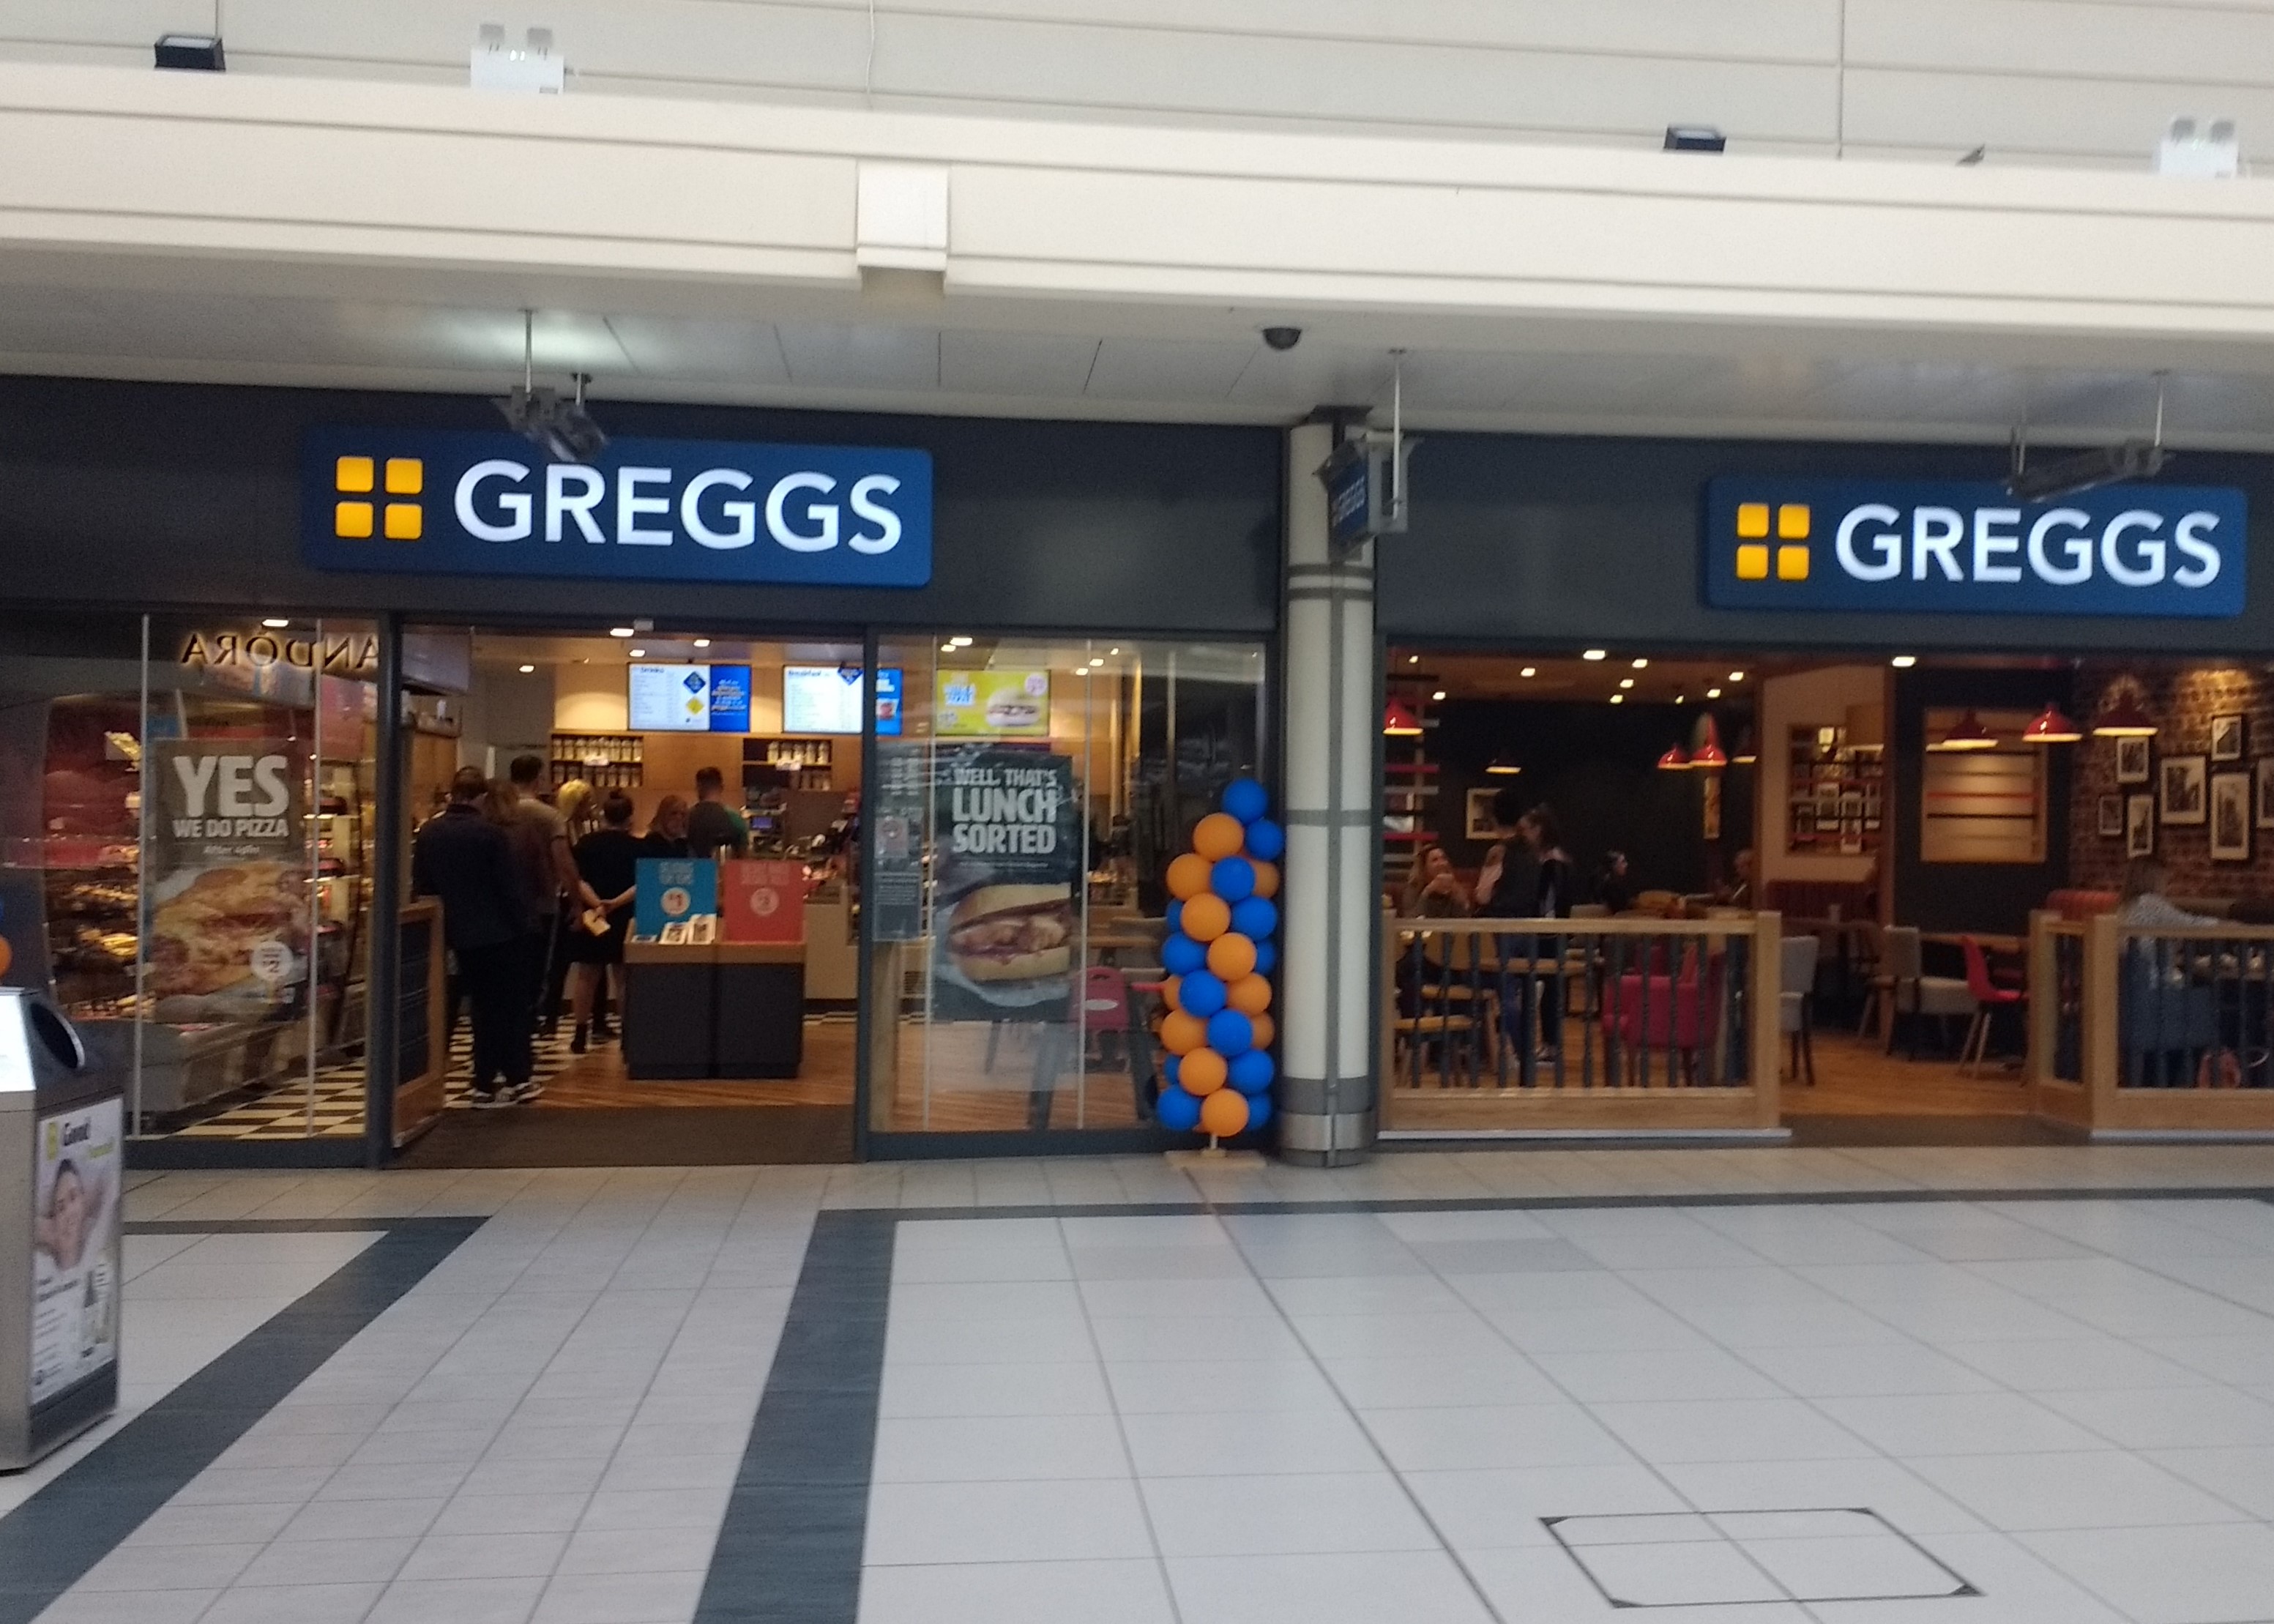 Greggs upgrade to a new and improved unit in Coopers Square Shopping Centre, Burton-upon-Trent